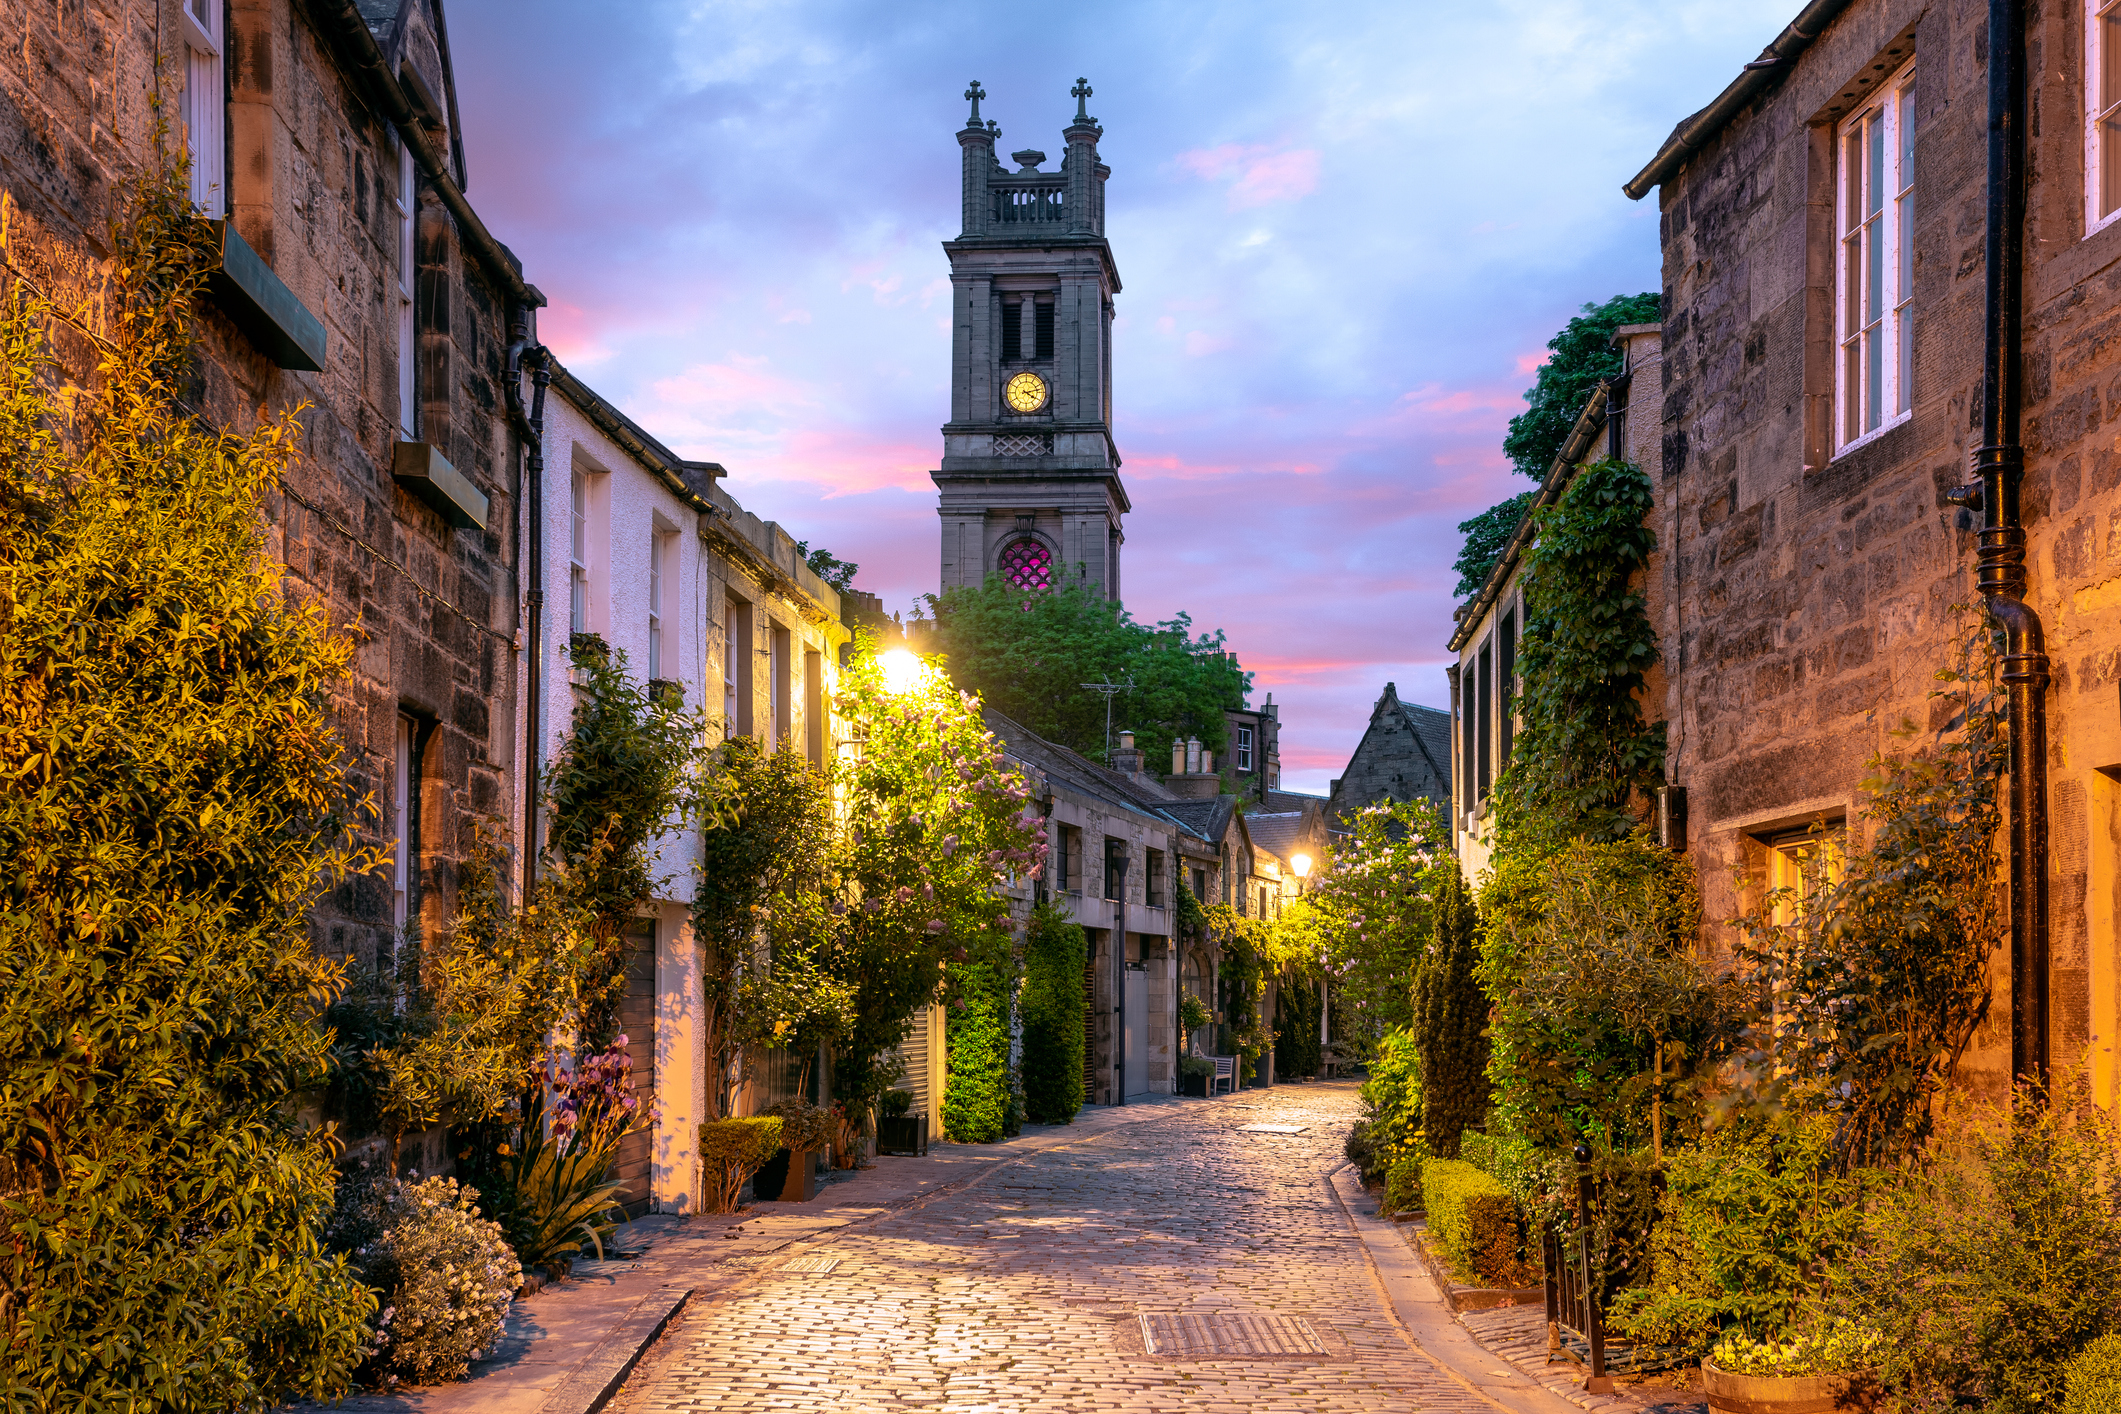 Cobbled street leads to a clock tower between old buildings at dusk